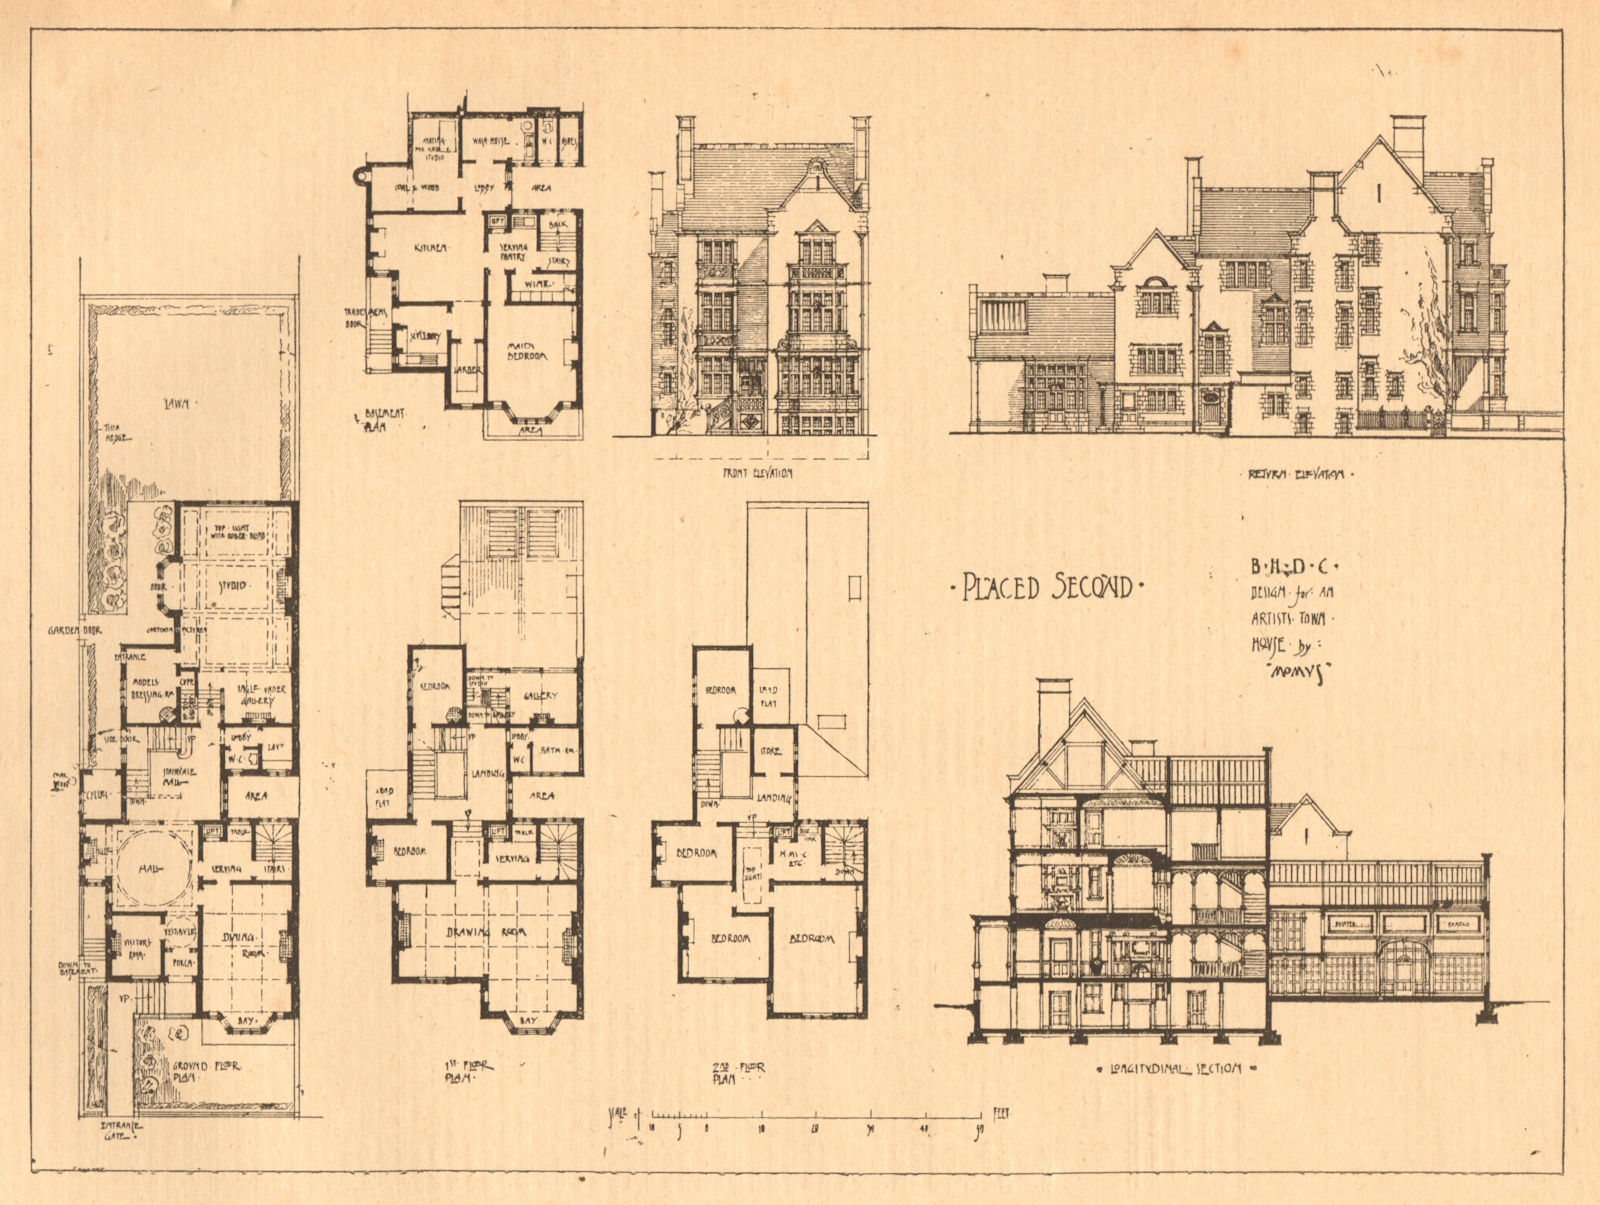 Design for an artist's town house by Momus. Floorplans & elevations 1902 print